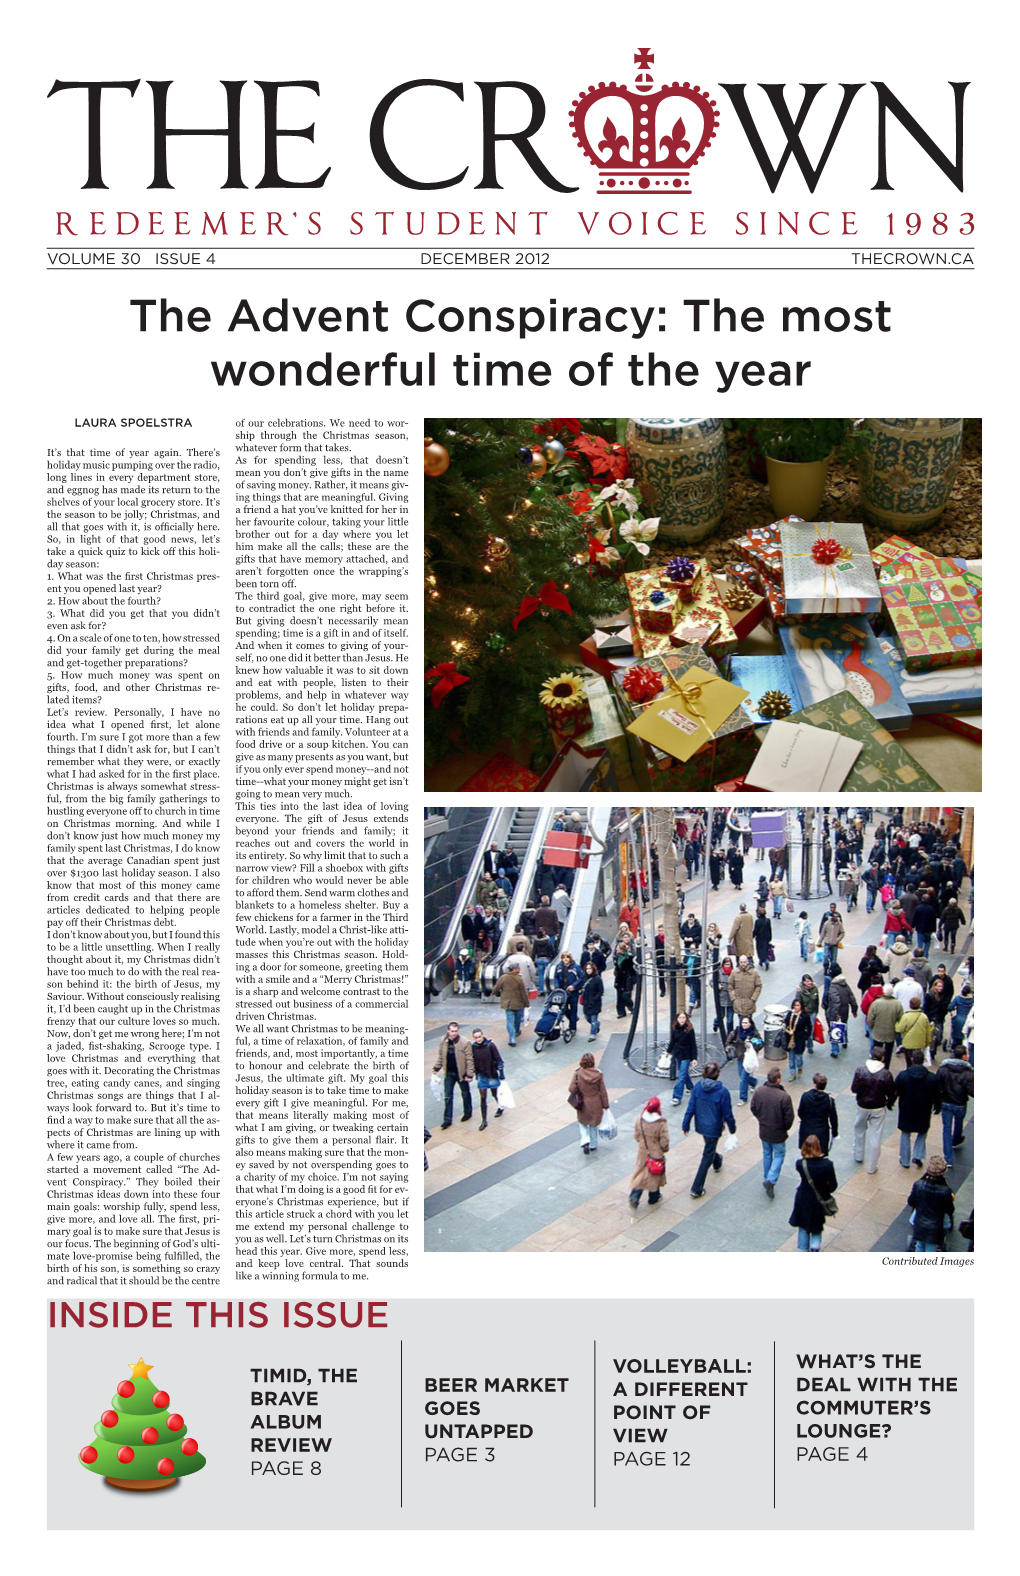 The Advent Conspiracy: the Most Wonderful Time of the Year